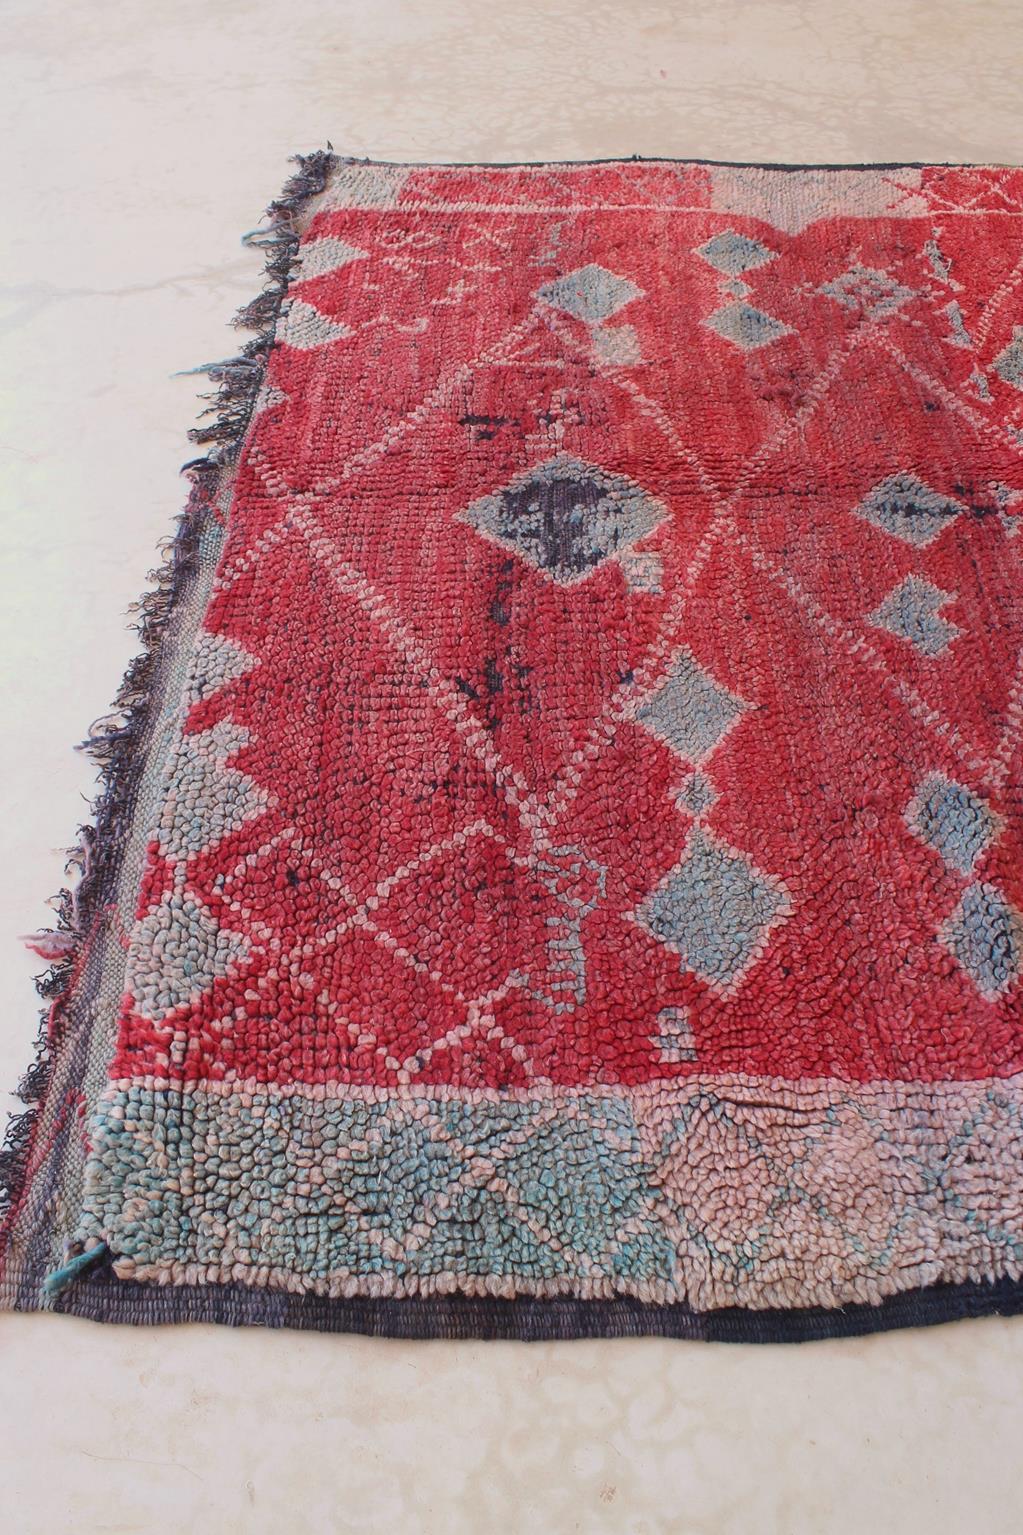 Vintage Moroccan Zayane rug - Red/green - 7x12feet / 213x365cm For Sale 1